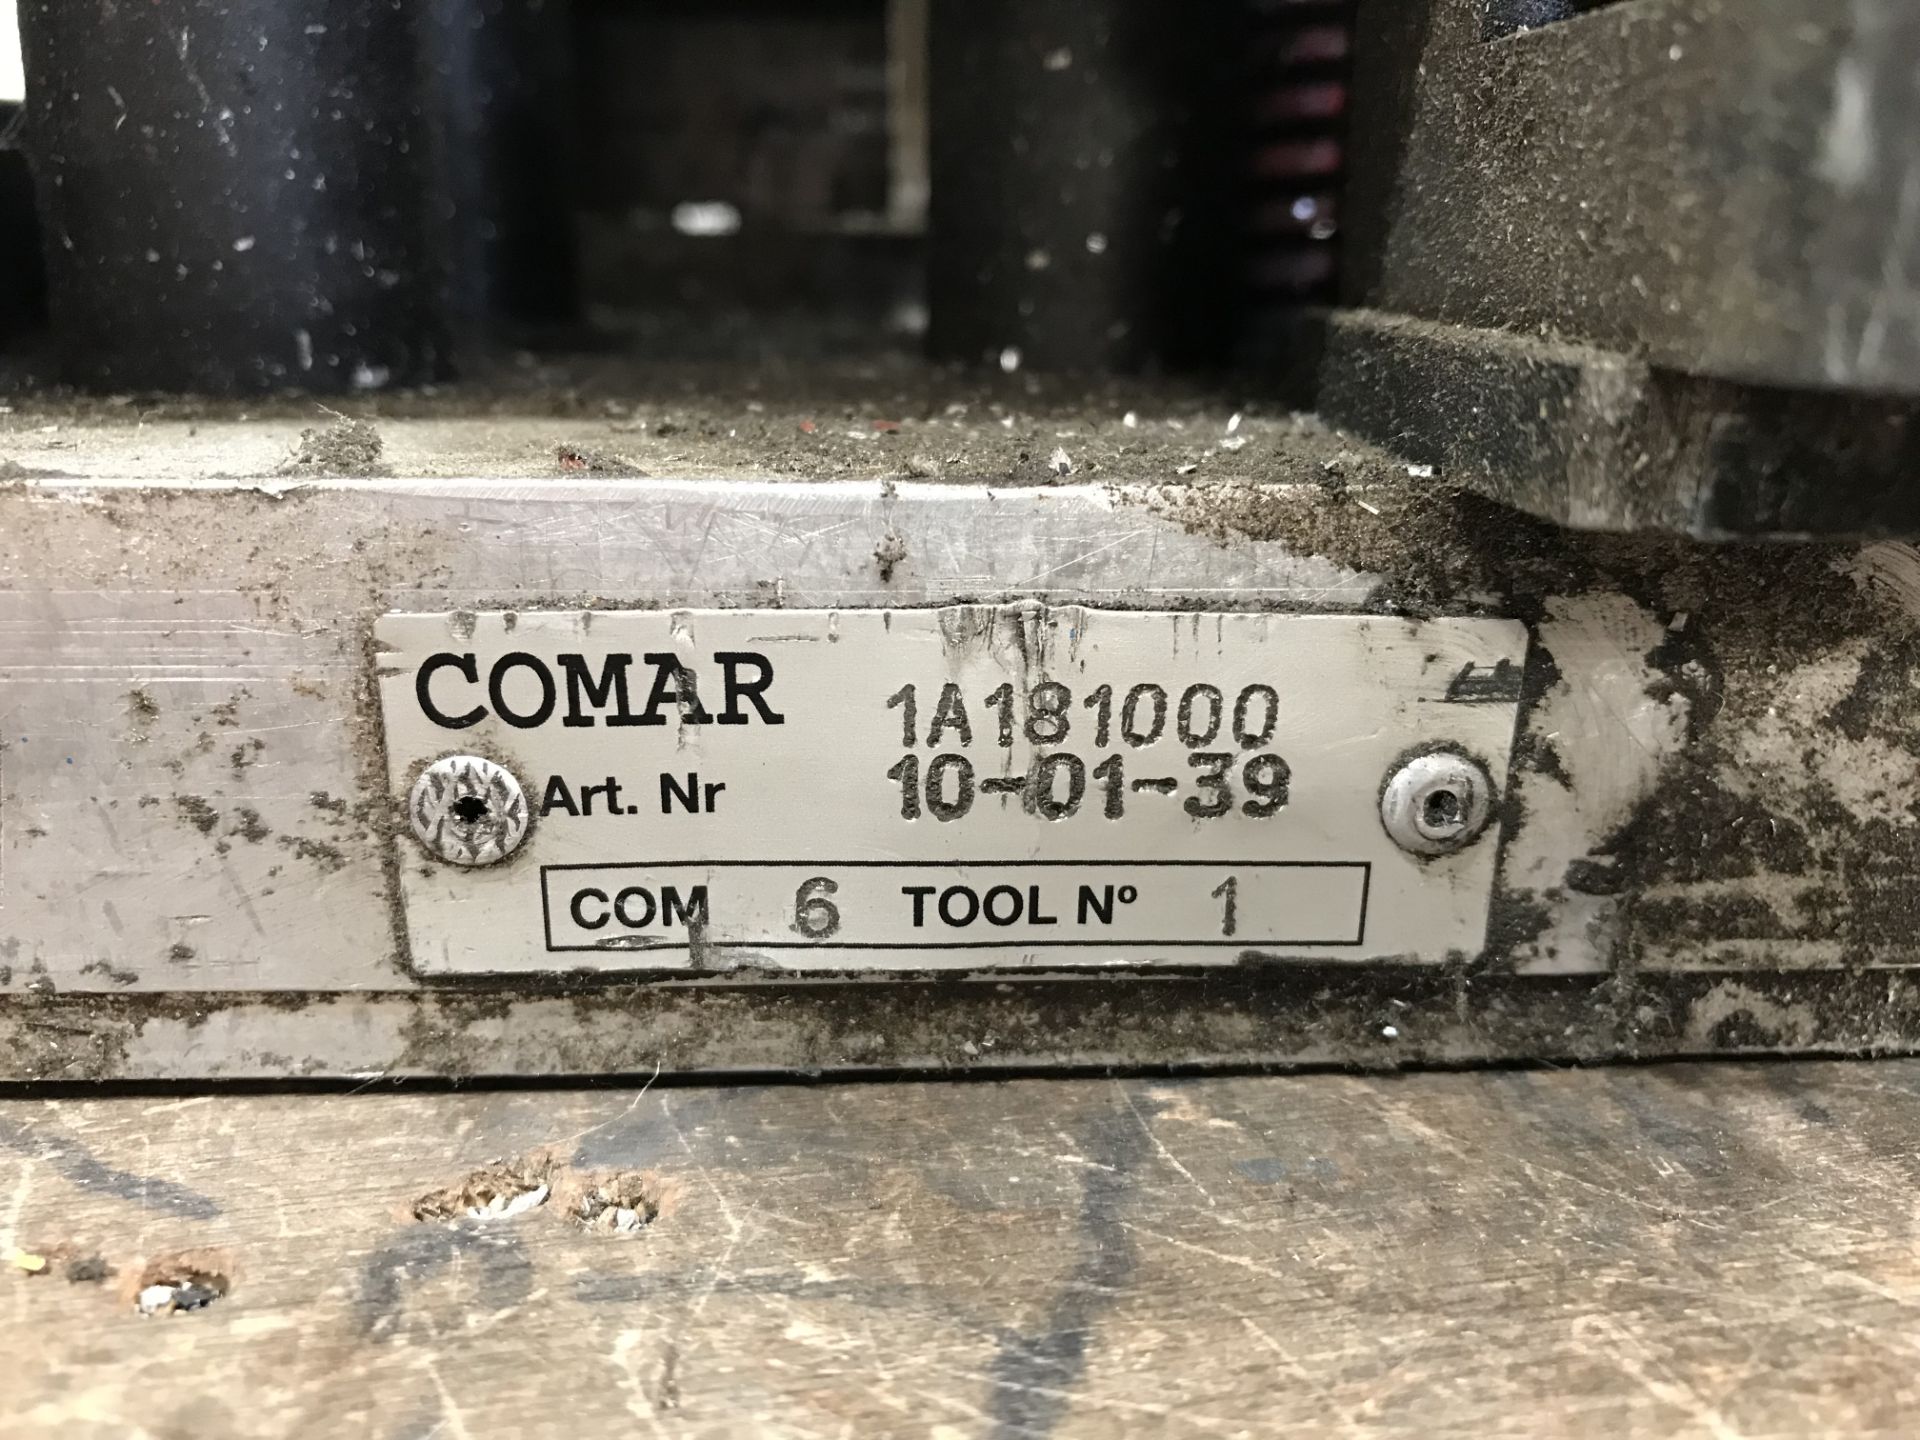 Comar Punch Tool, for curtain walling COM6 Tool 1, no. 1A181000 10-01-39 and Comar Punch Tool COM6 - Image 2 of 3